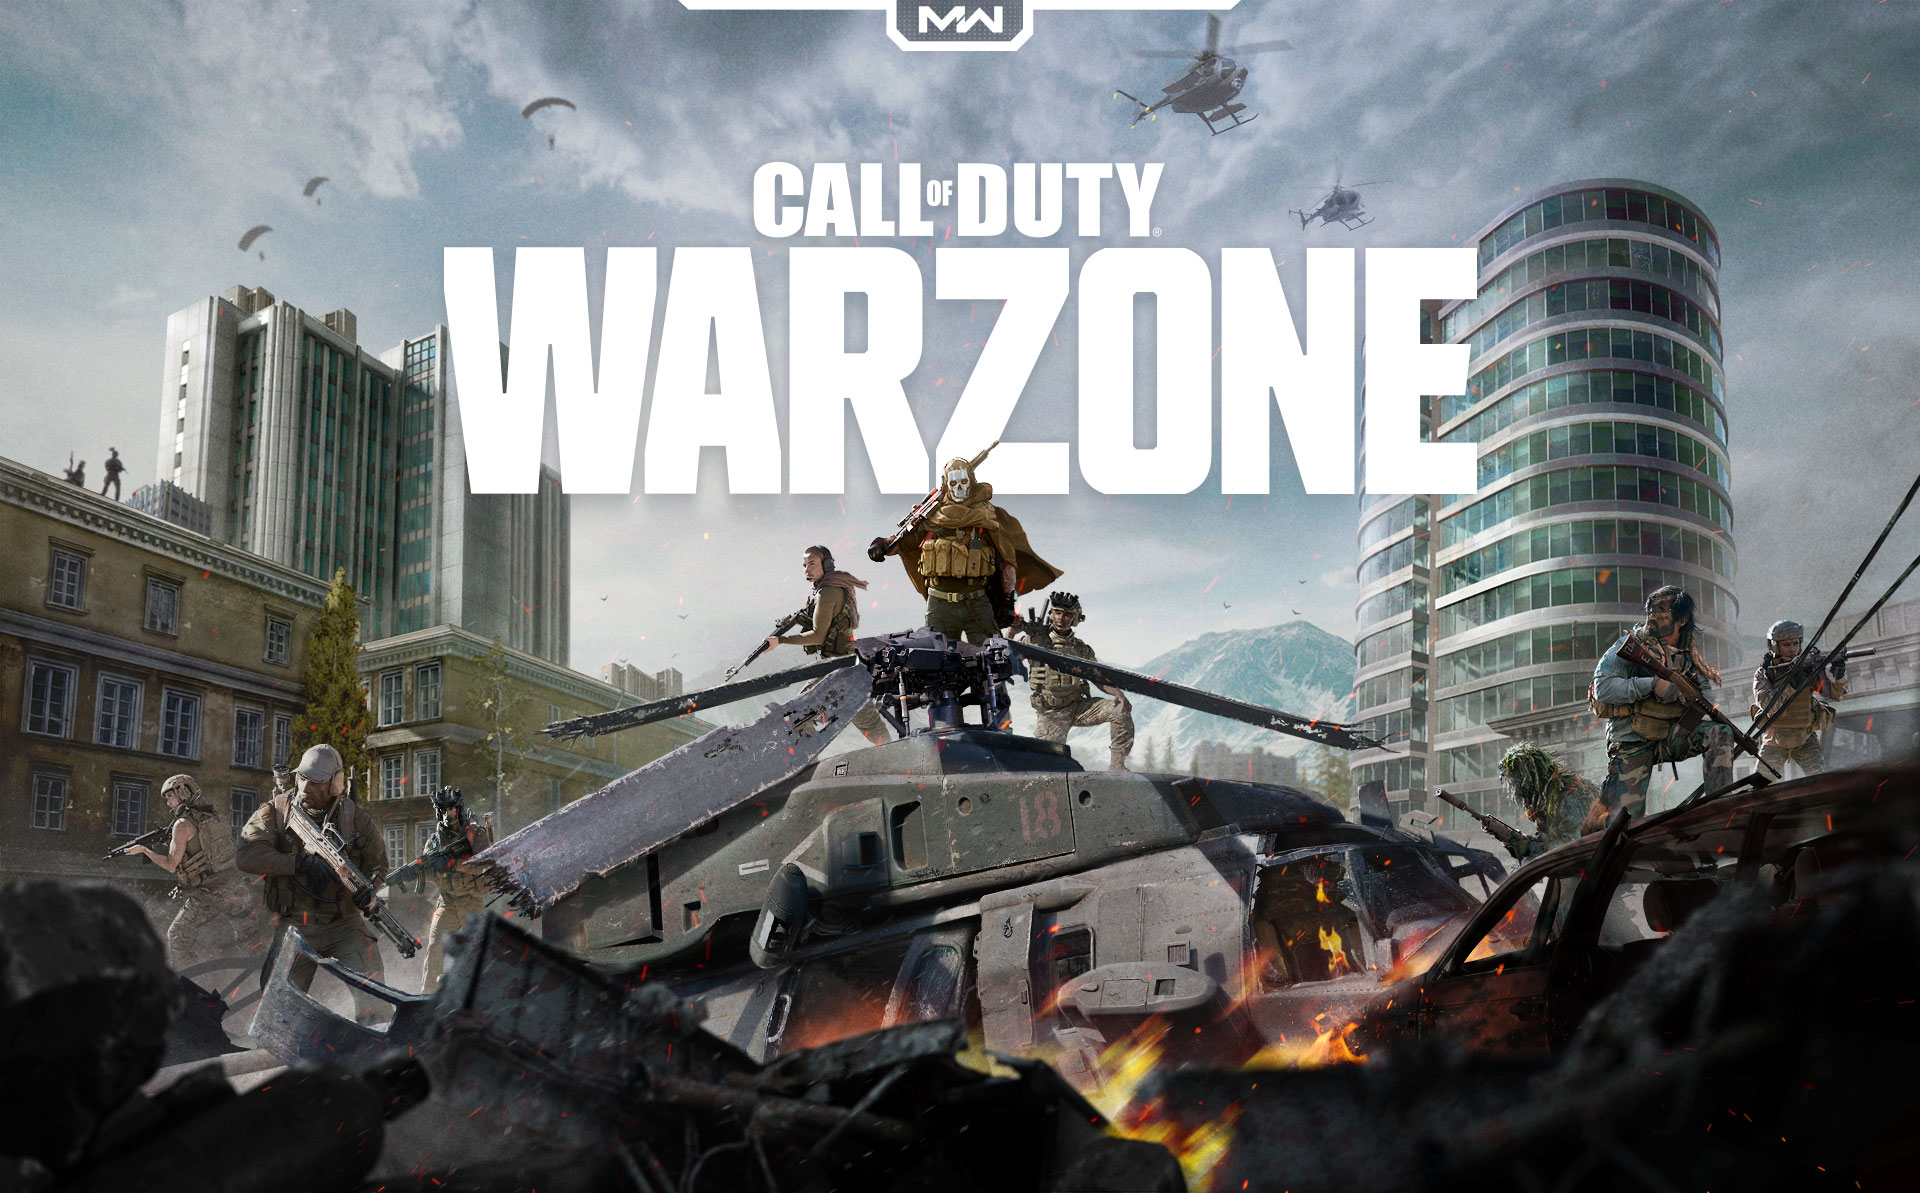 Title: Call of Duty: Warzone – The Ultimate Battle Royale Experience